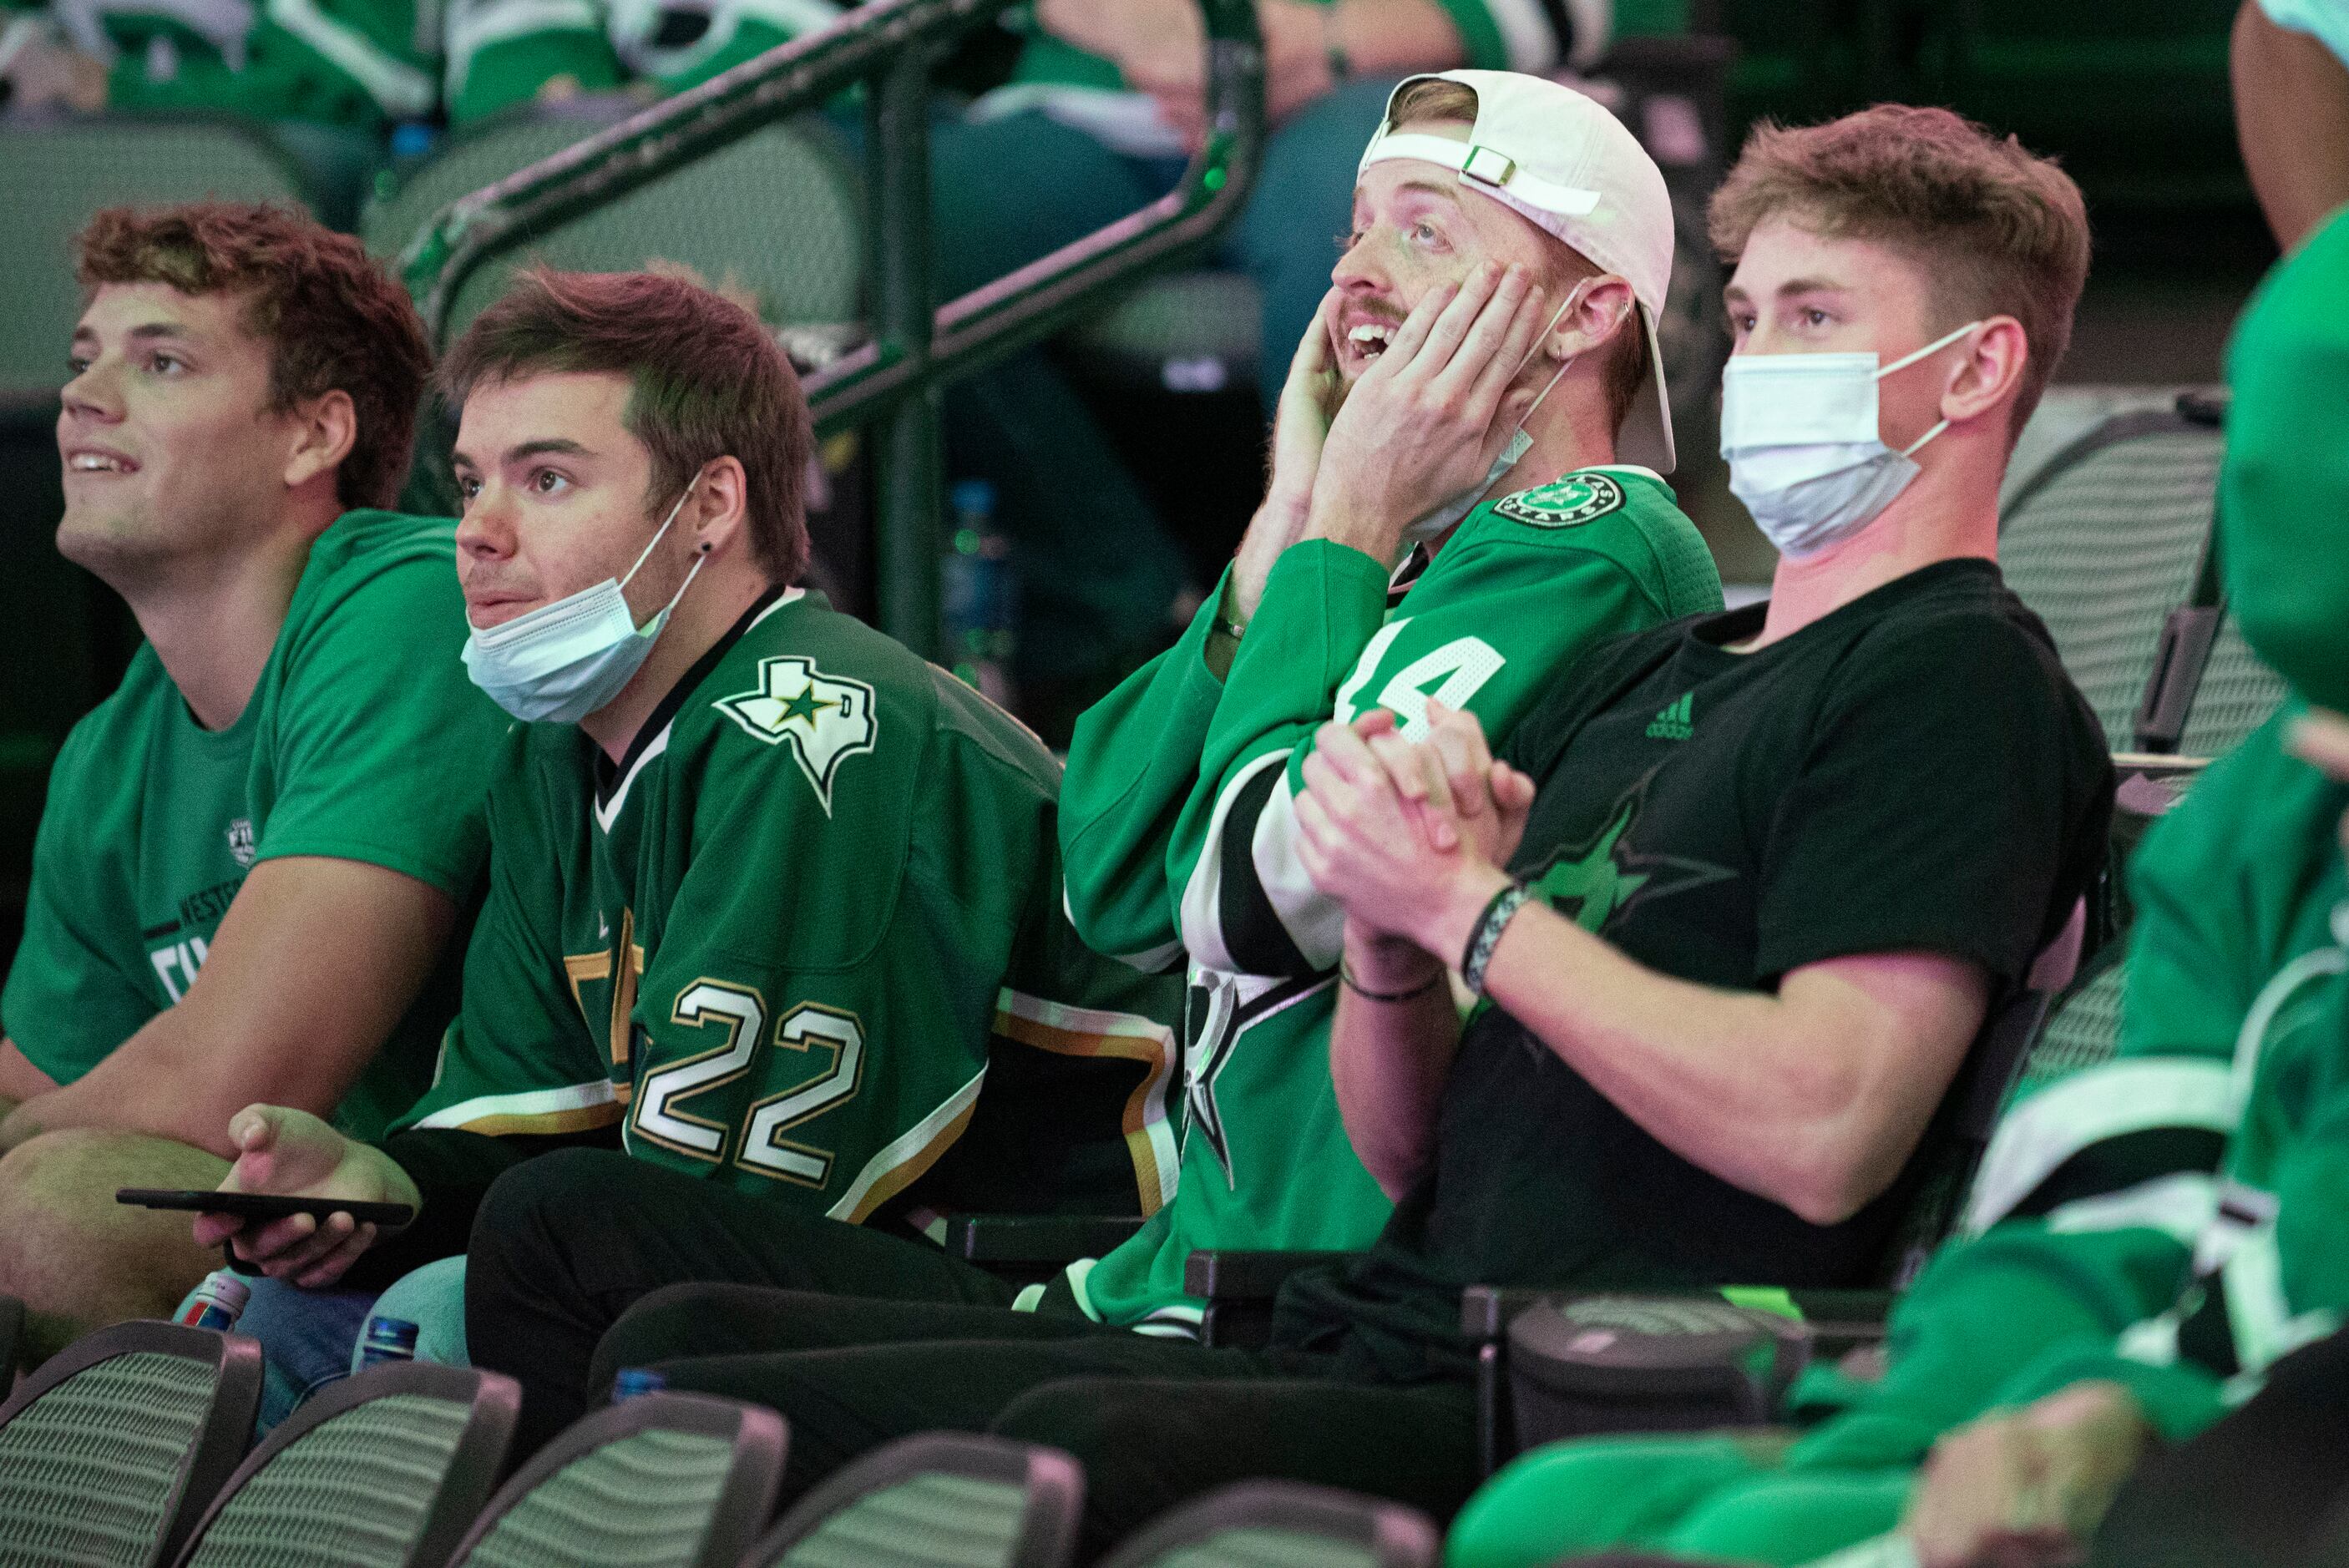 Hockey fans Casen Chase, 19, far-right, and Cooper Case, 21, at left, react to game play...